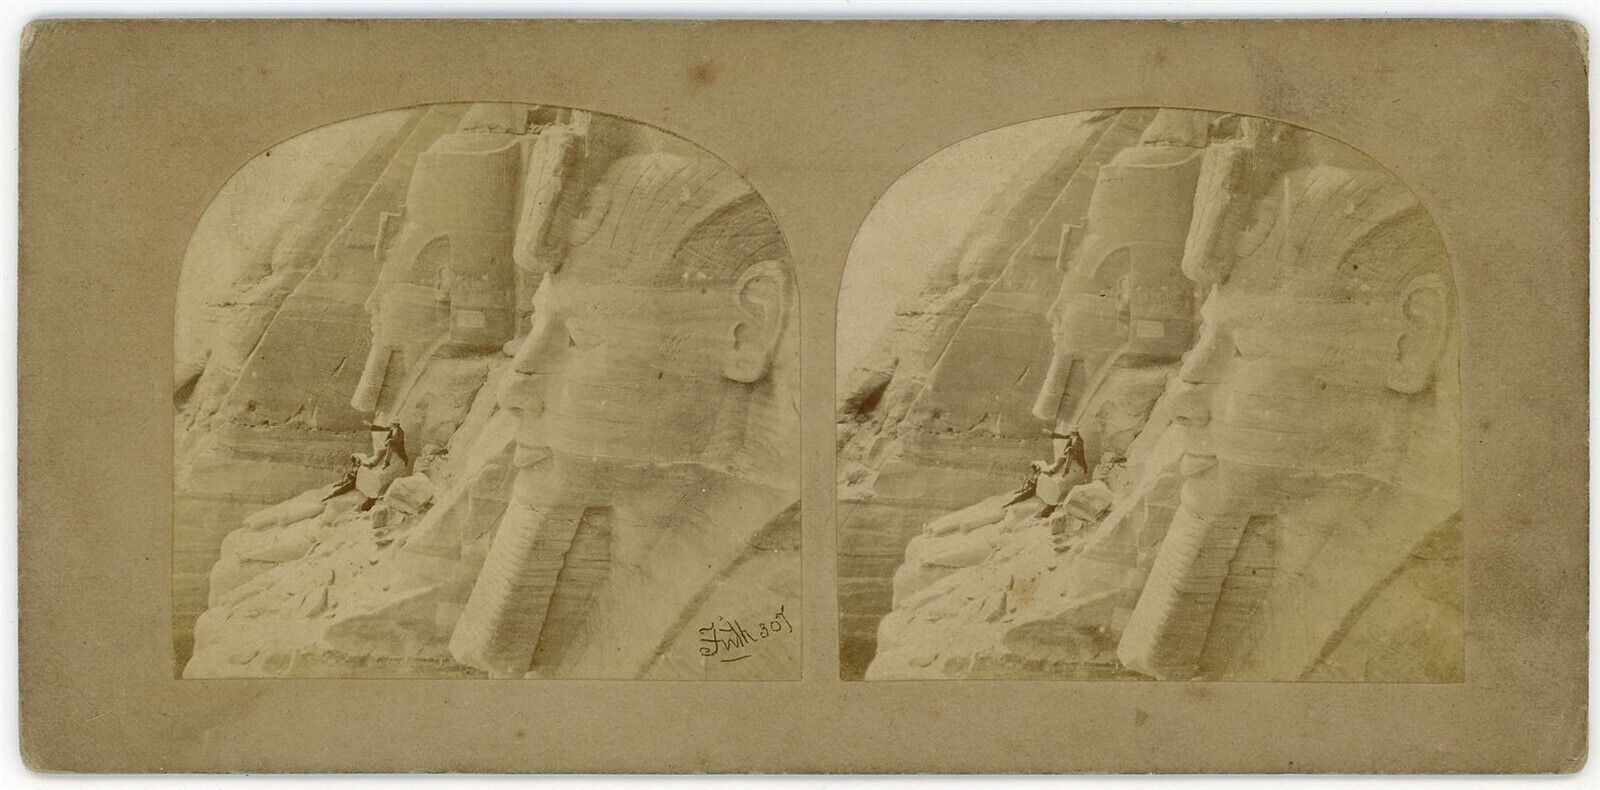 EGYPT SV - Abou Simbel - Great Rock Temple - Francis Frith 1860s